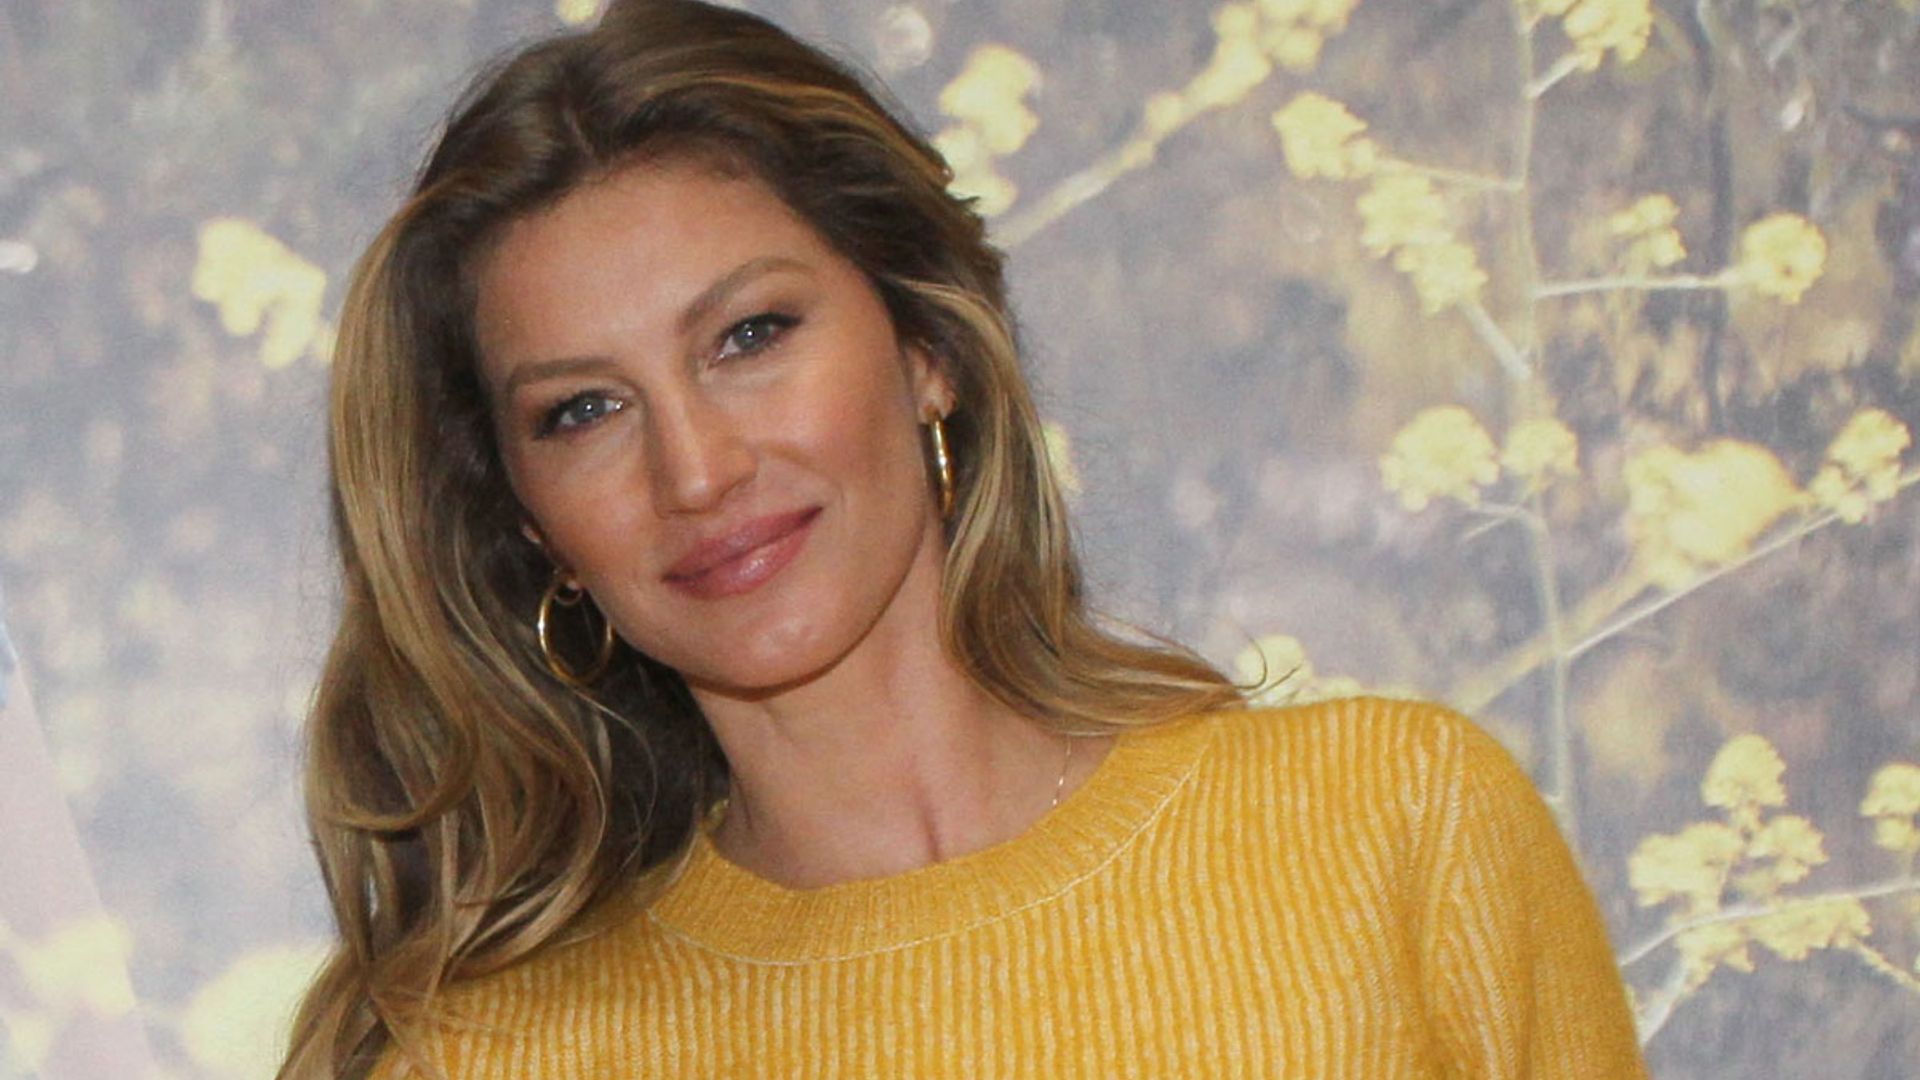 Gisele Bundchen Is Unrecognizable In New Video And Tom Brady Has The Best Reaction Hello 8742